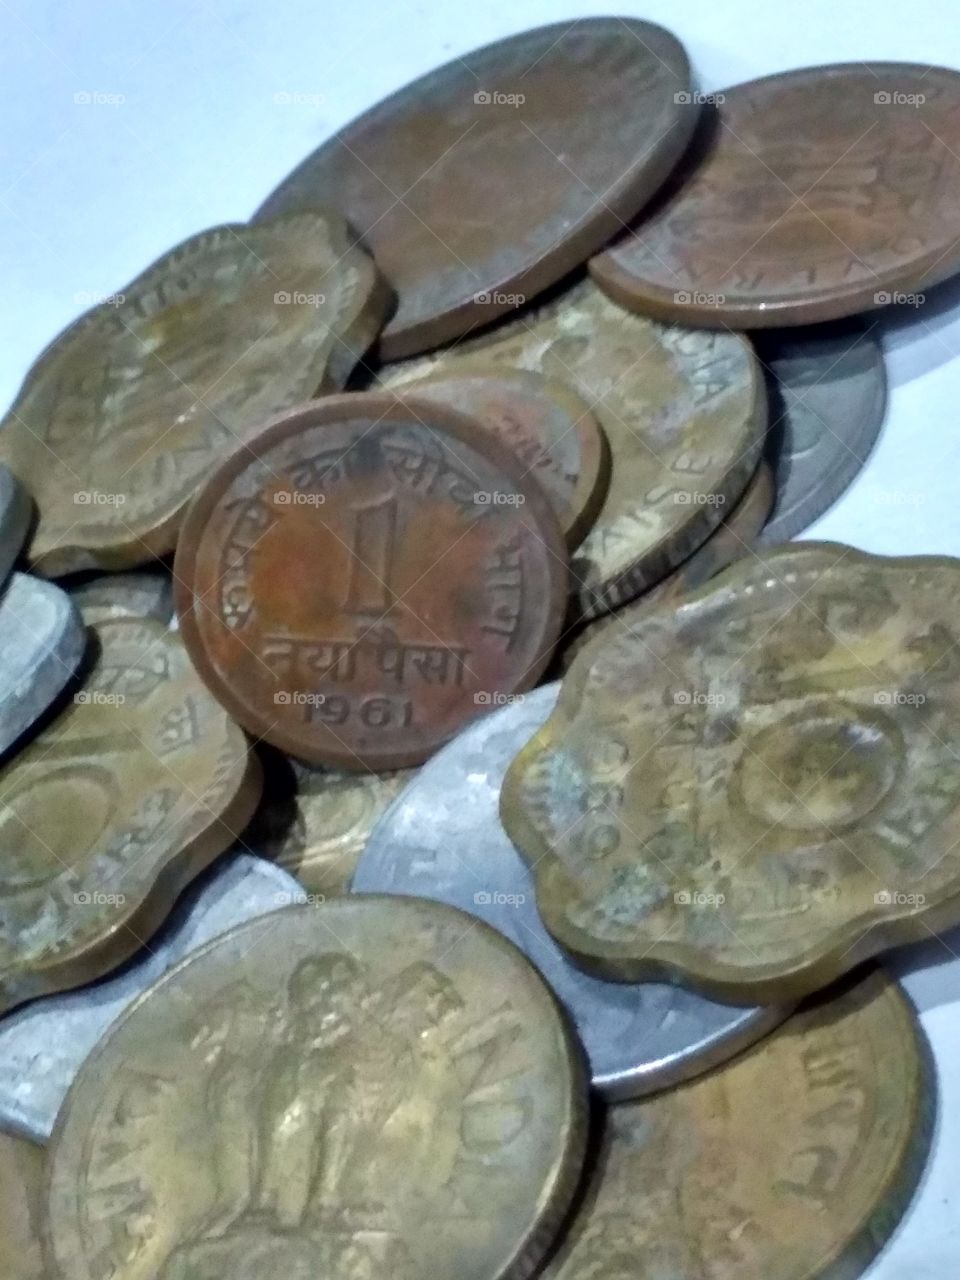 coins back then